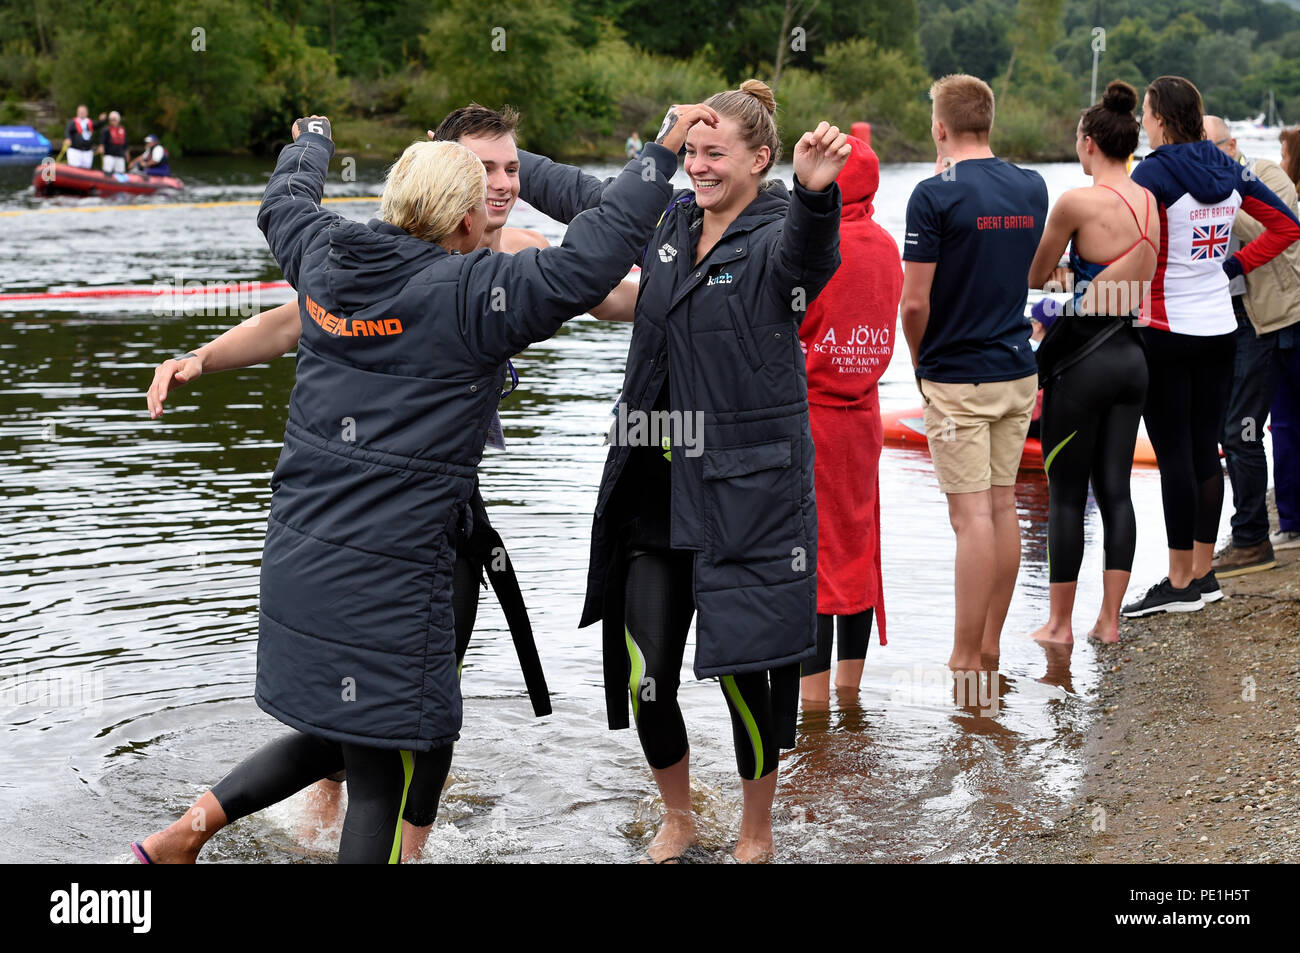 The Netherland's team Esmee Vermeulen, Sharon Van Rouwendaal and Maxime Smits Pepijn celebrate winning Gold in the Open Water Swimming Mixed Relay during day ten of the 2018 European Championships at Loch Lomond, Stirling. PRESS ASSOCIATION Photo. Picture date: Saturday August 11, 2018. See PA story OPEN European. Photo credit should read: Ian Rutherford/PA Wire. Stock Photo